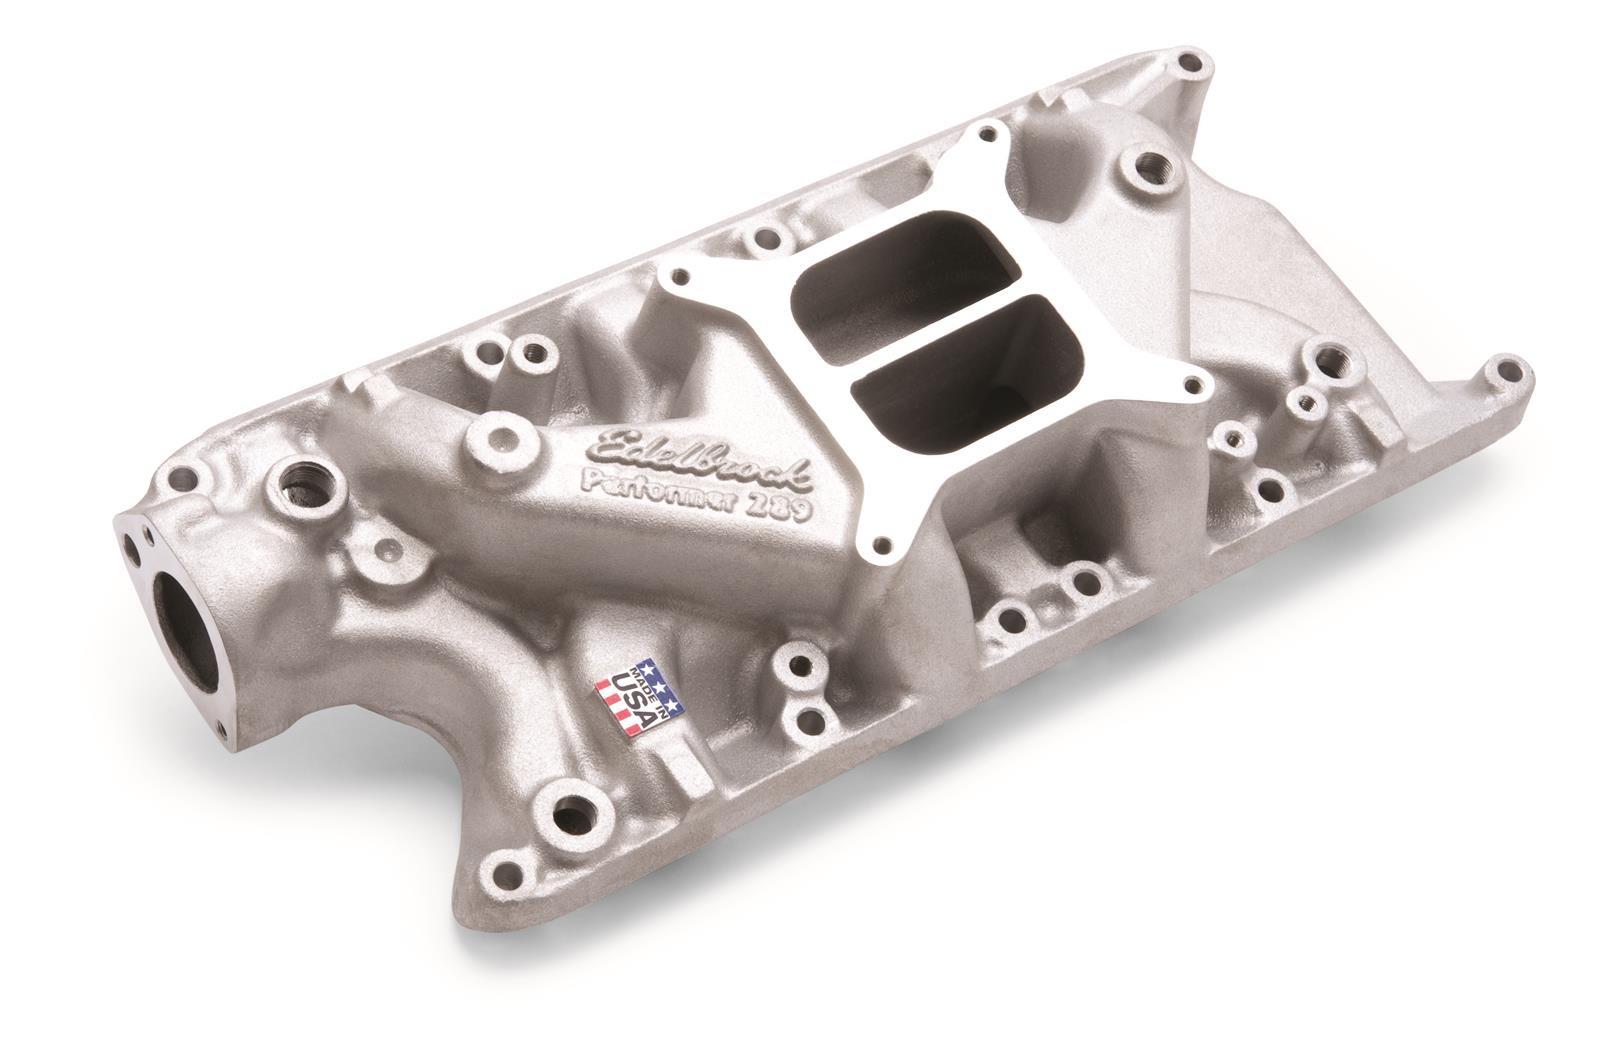 Second generation Ford Mustang Aftermarket Intake Manifold